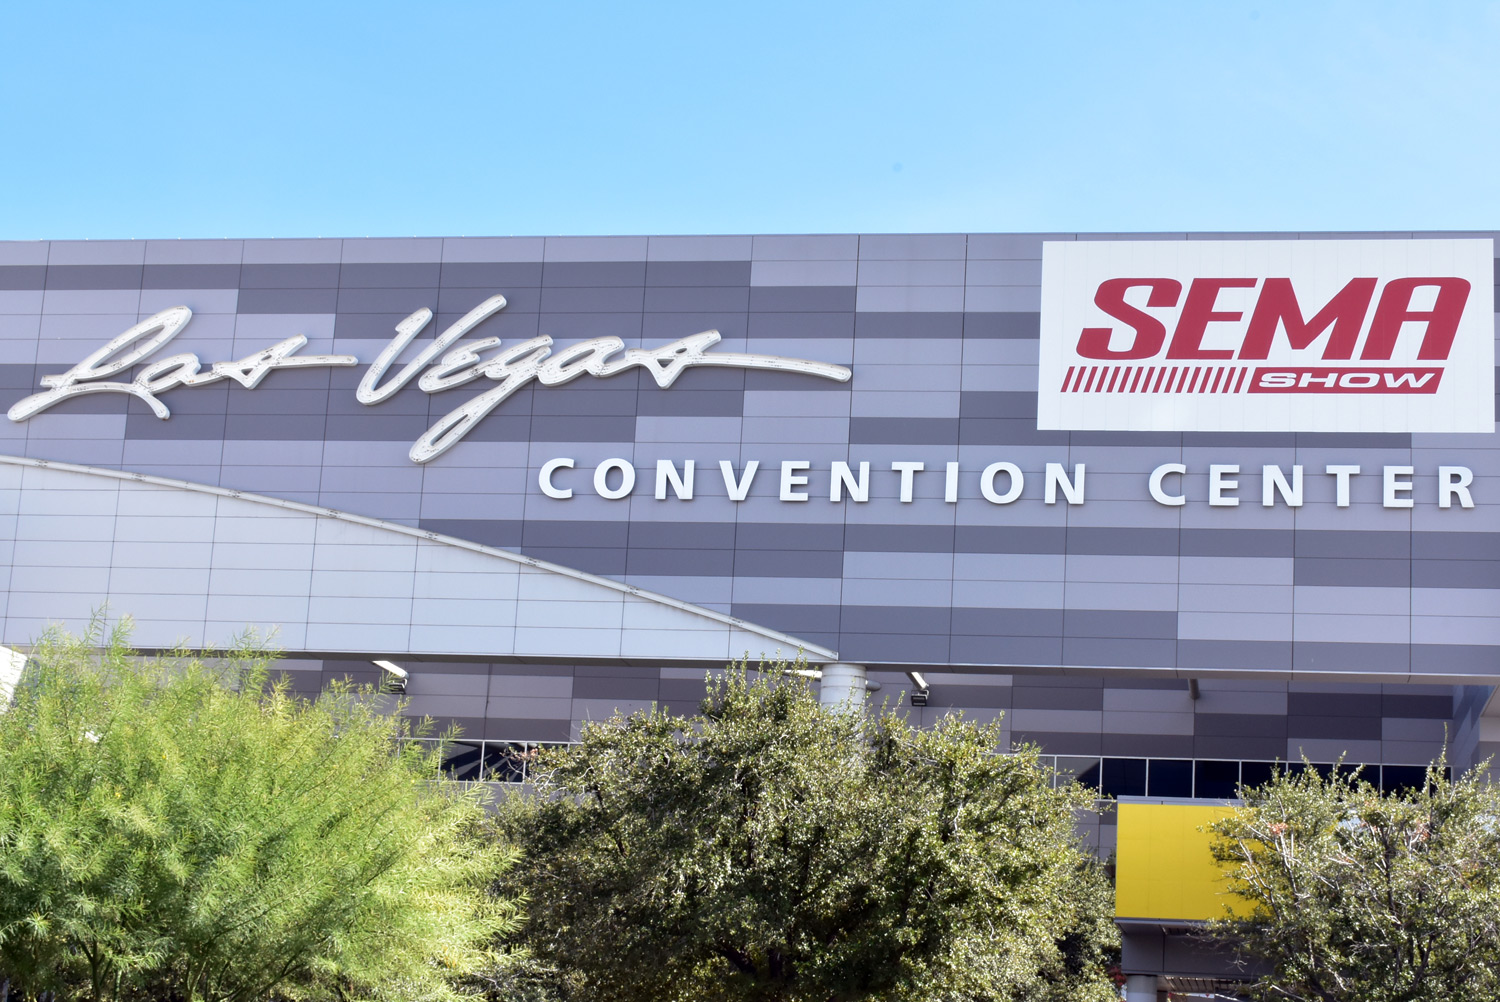 Industry Wary On Attending SEMA Amid COVID-19